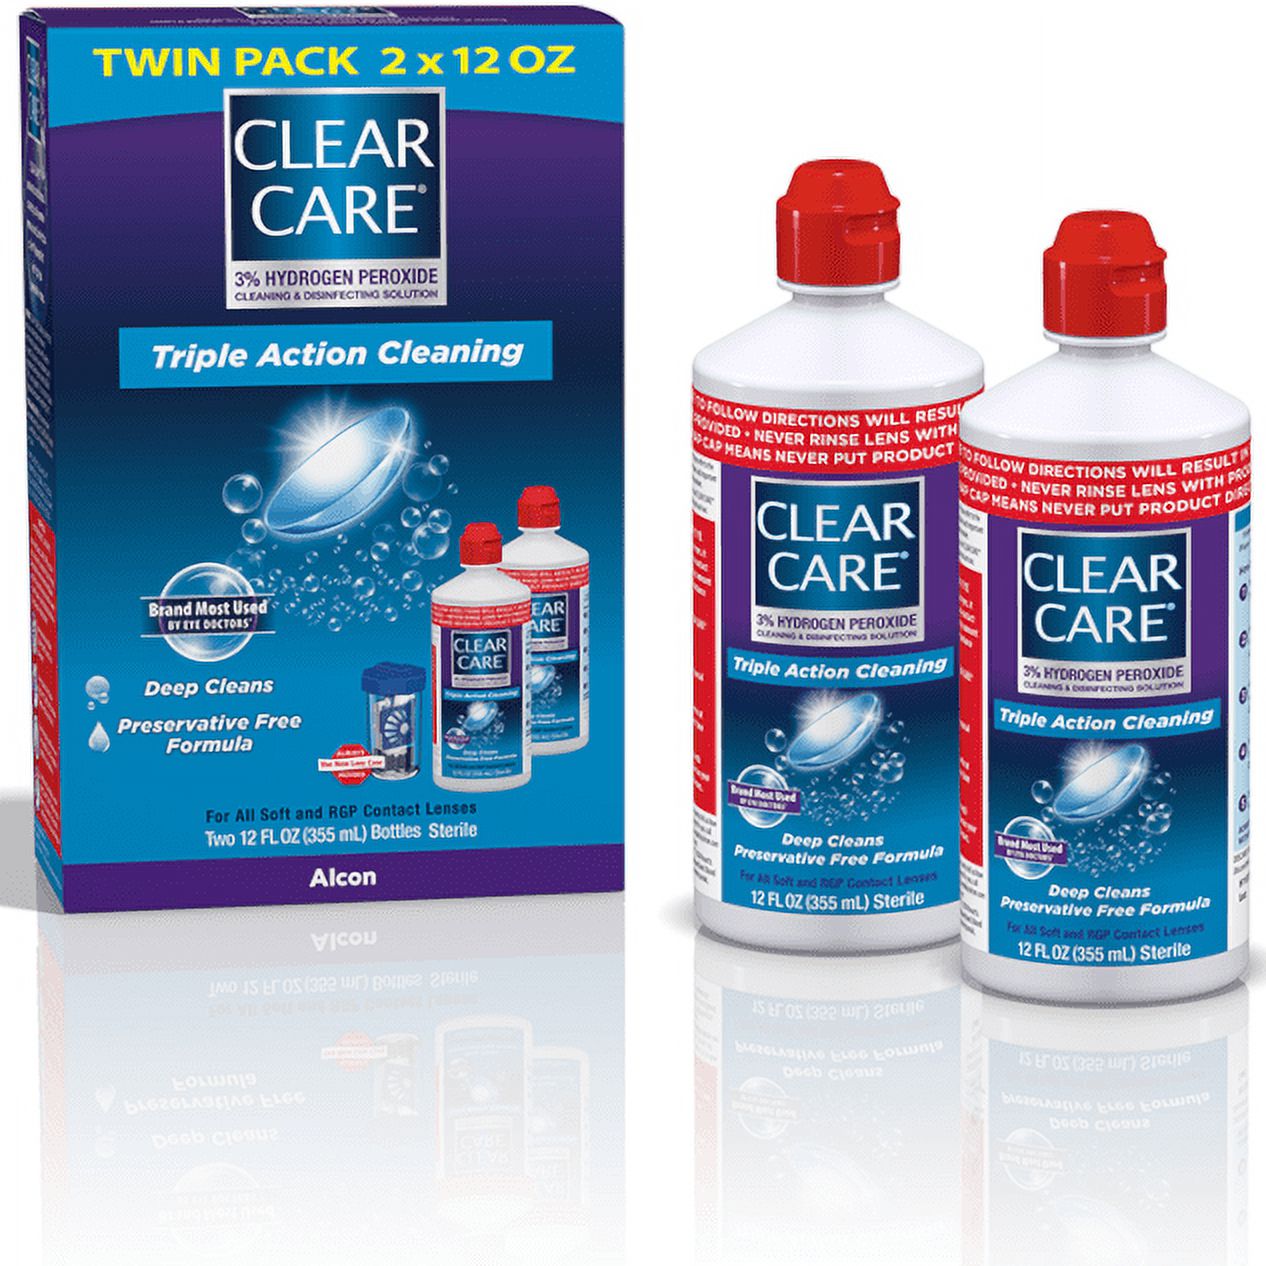 Clear Care Hydrogen Peroxide Contact Lens Cleaning and Disinfecting Liquid Solution, Two 12 oz per pack - image 1 of 9